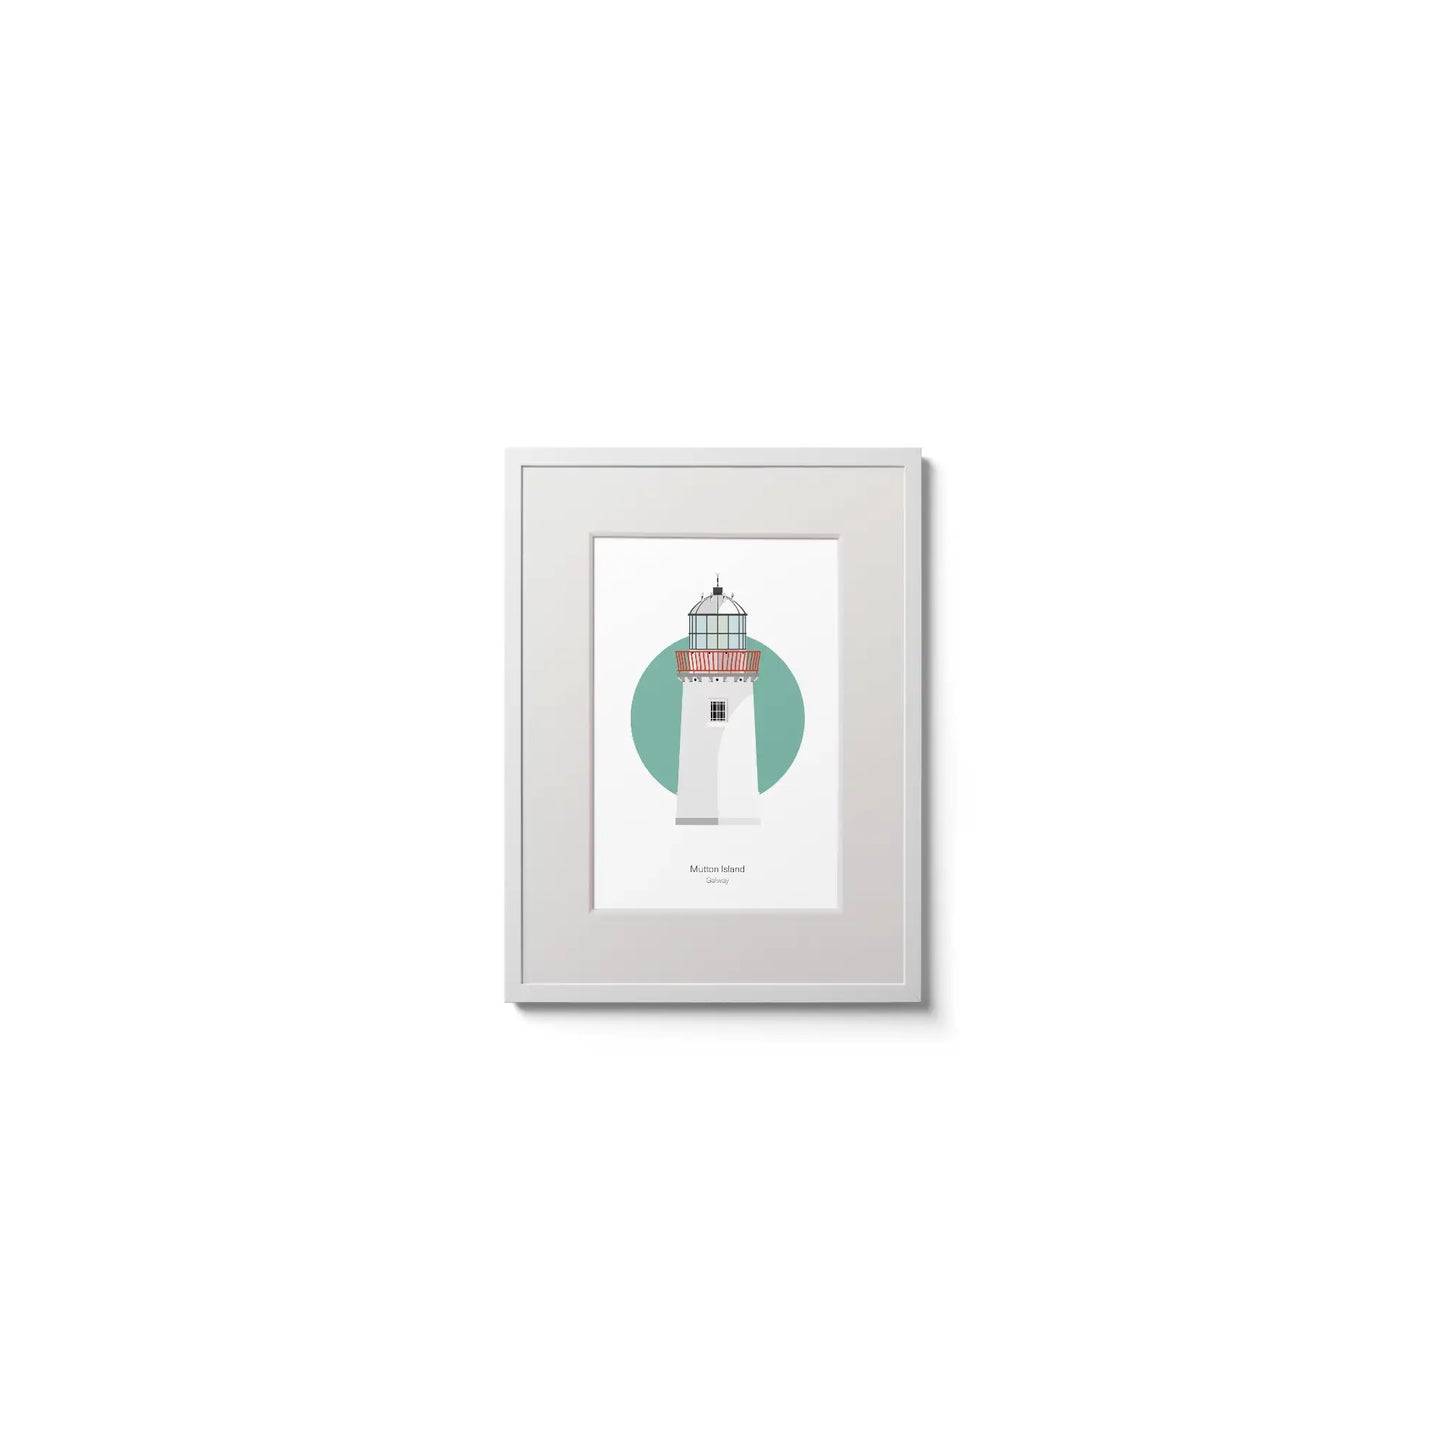 Illustration of Mutton Island lighthouse on a white background inside light blue square,  in a white frame measuring 15x20cm.